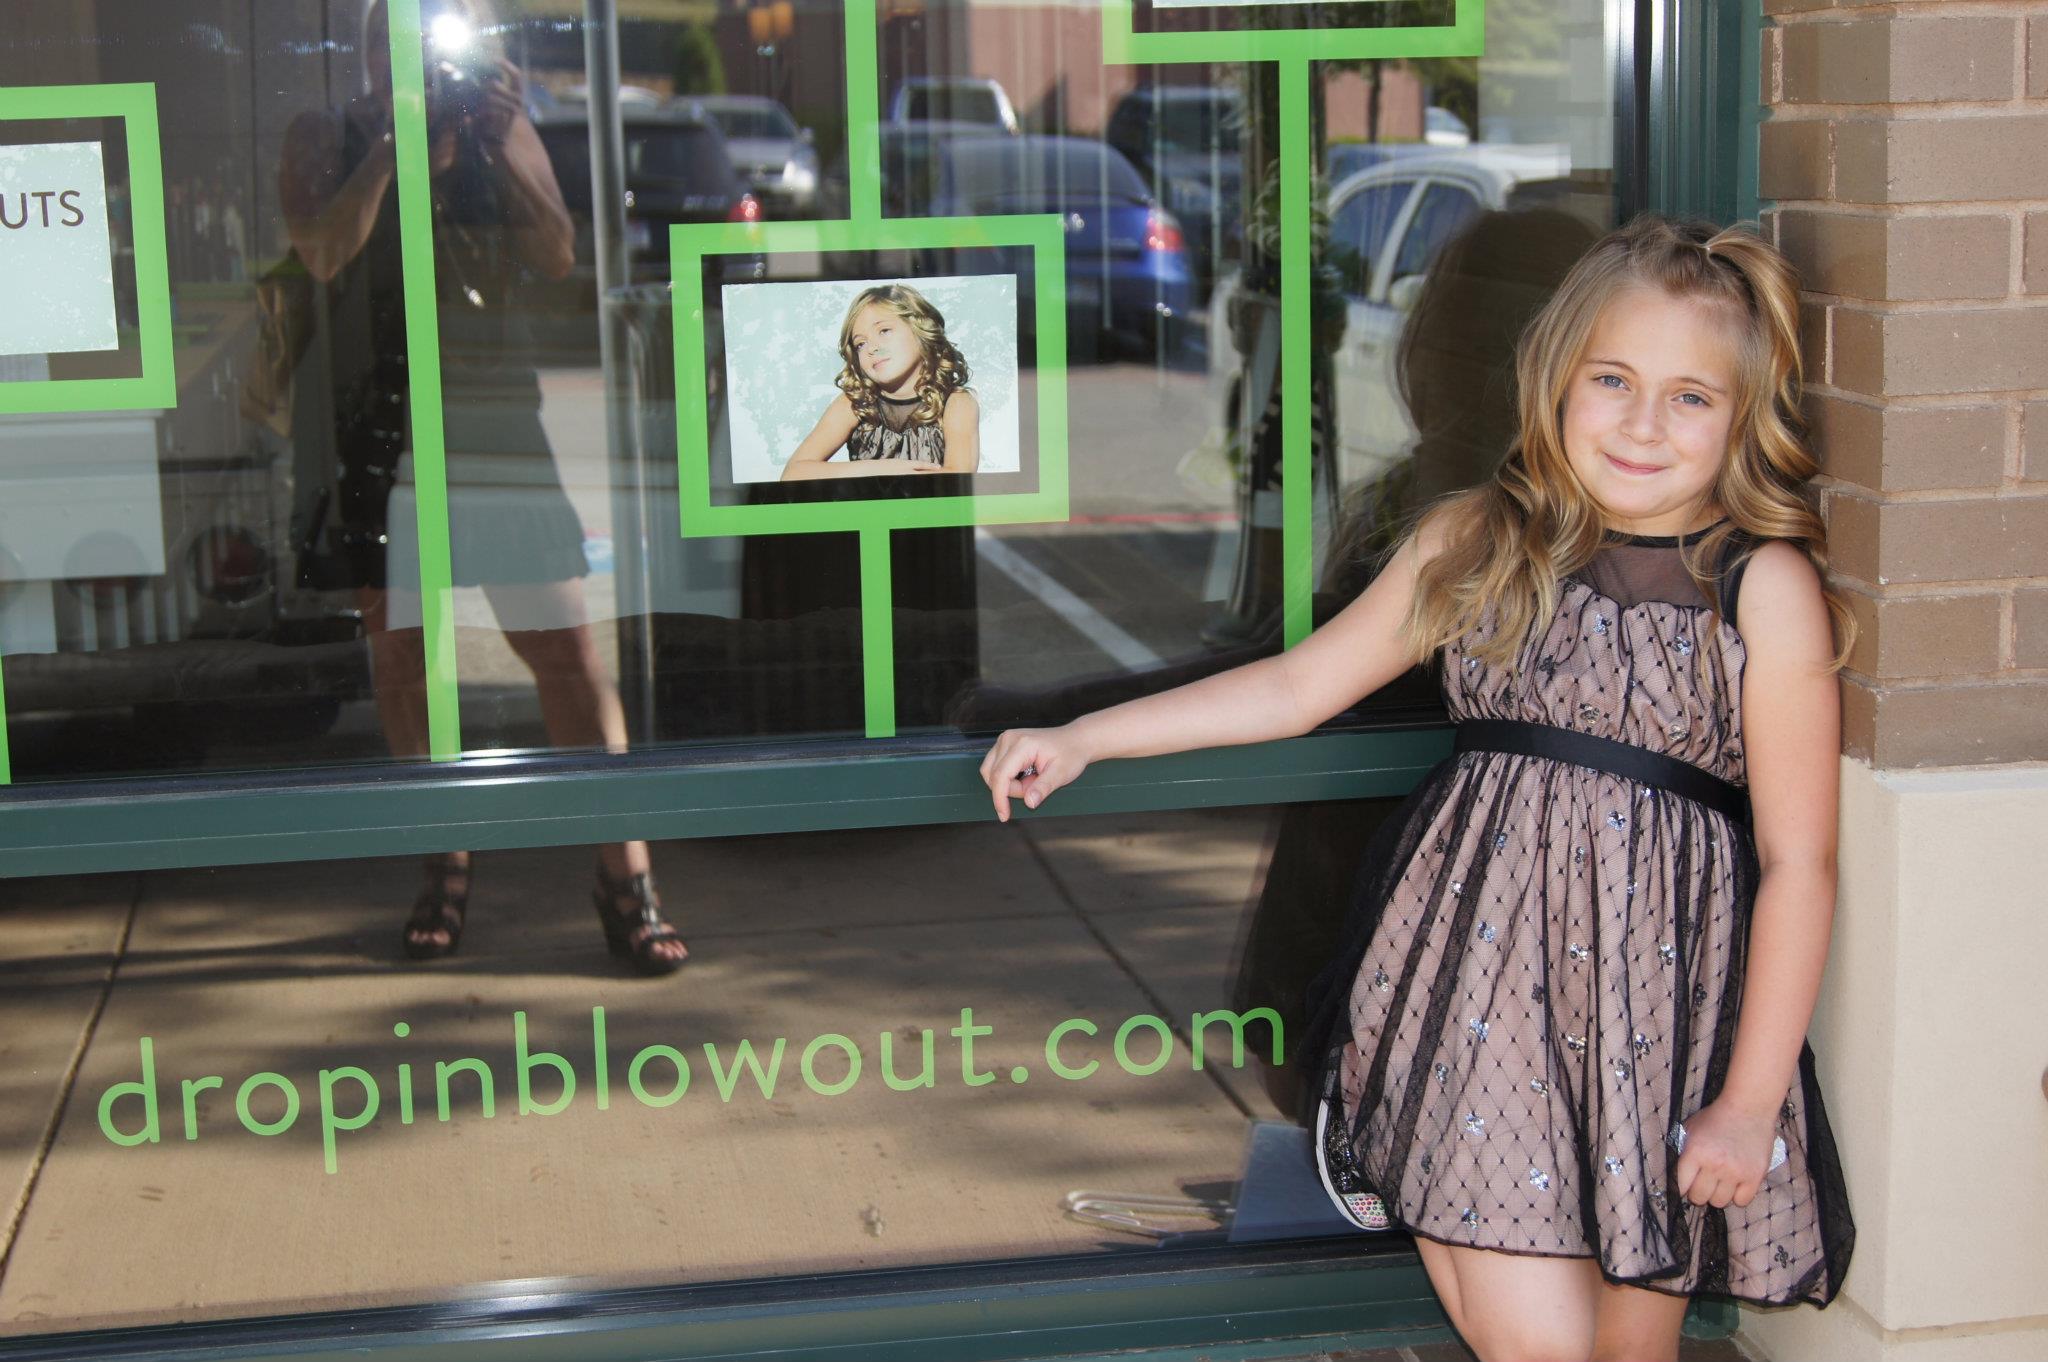 This is Tatum Jade outside of The Hair Bart store where she is featured on the store front graphics.